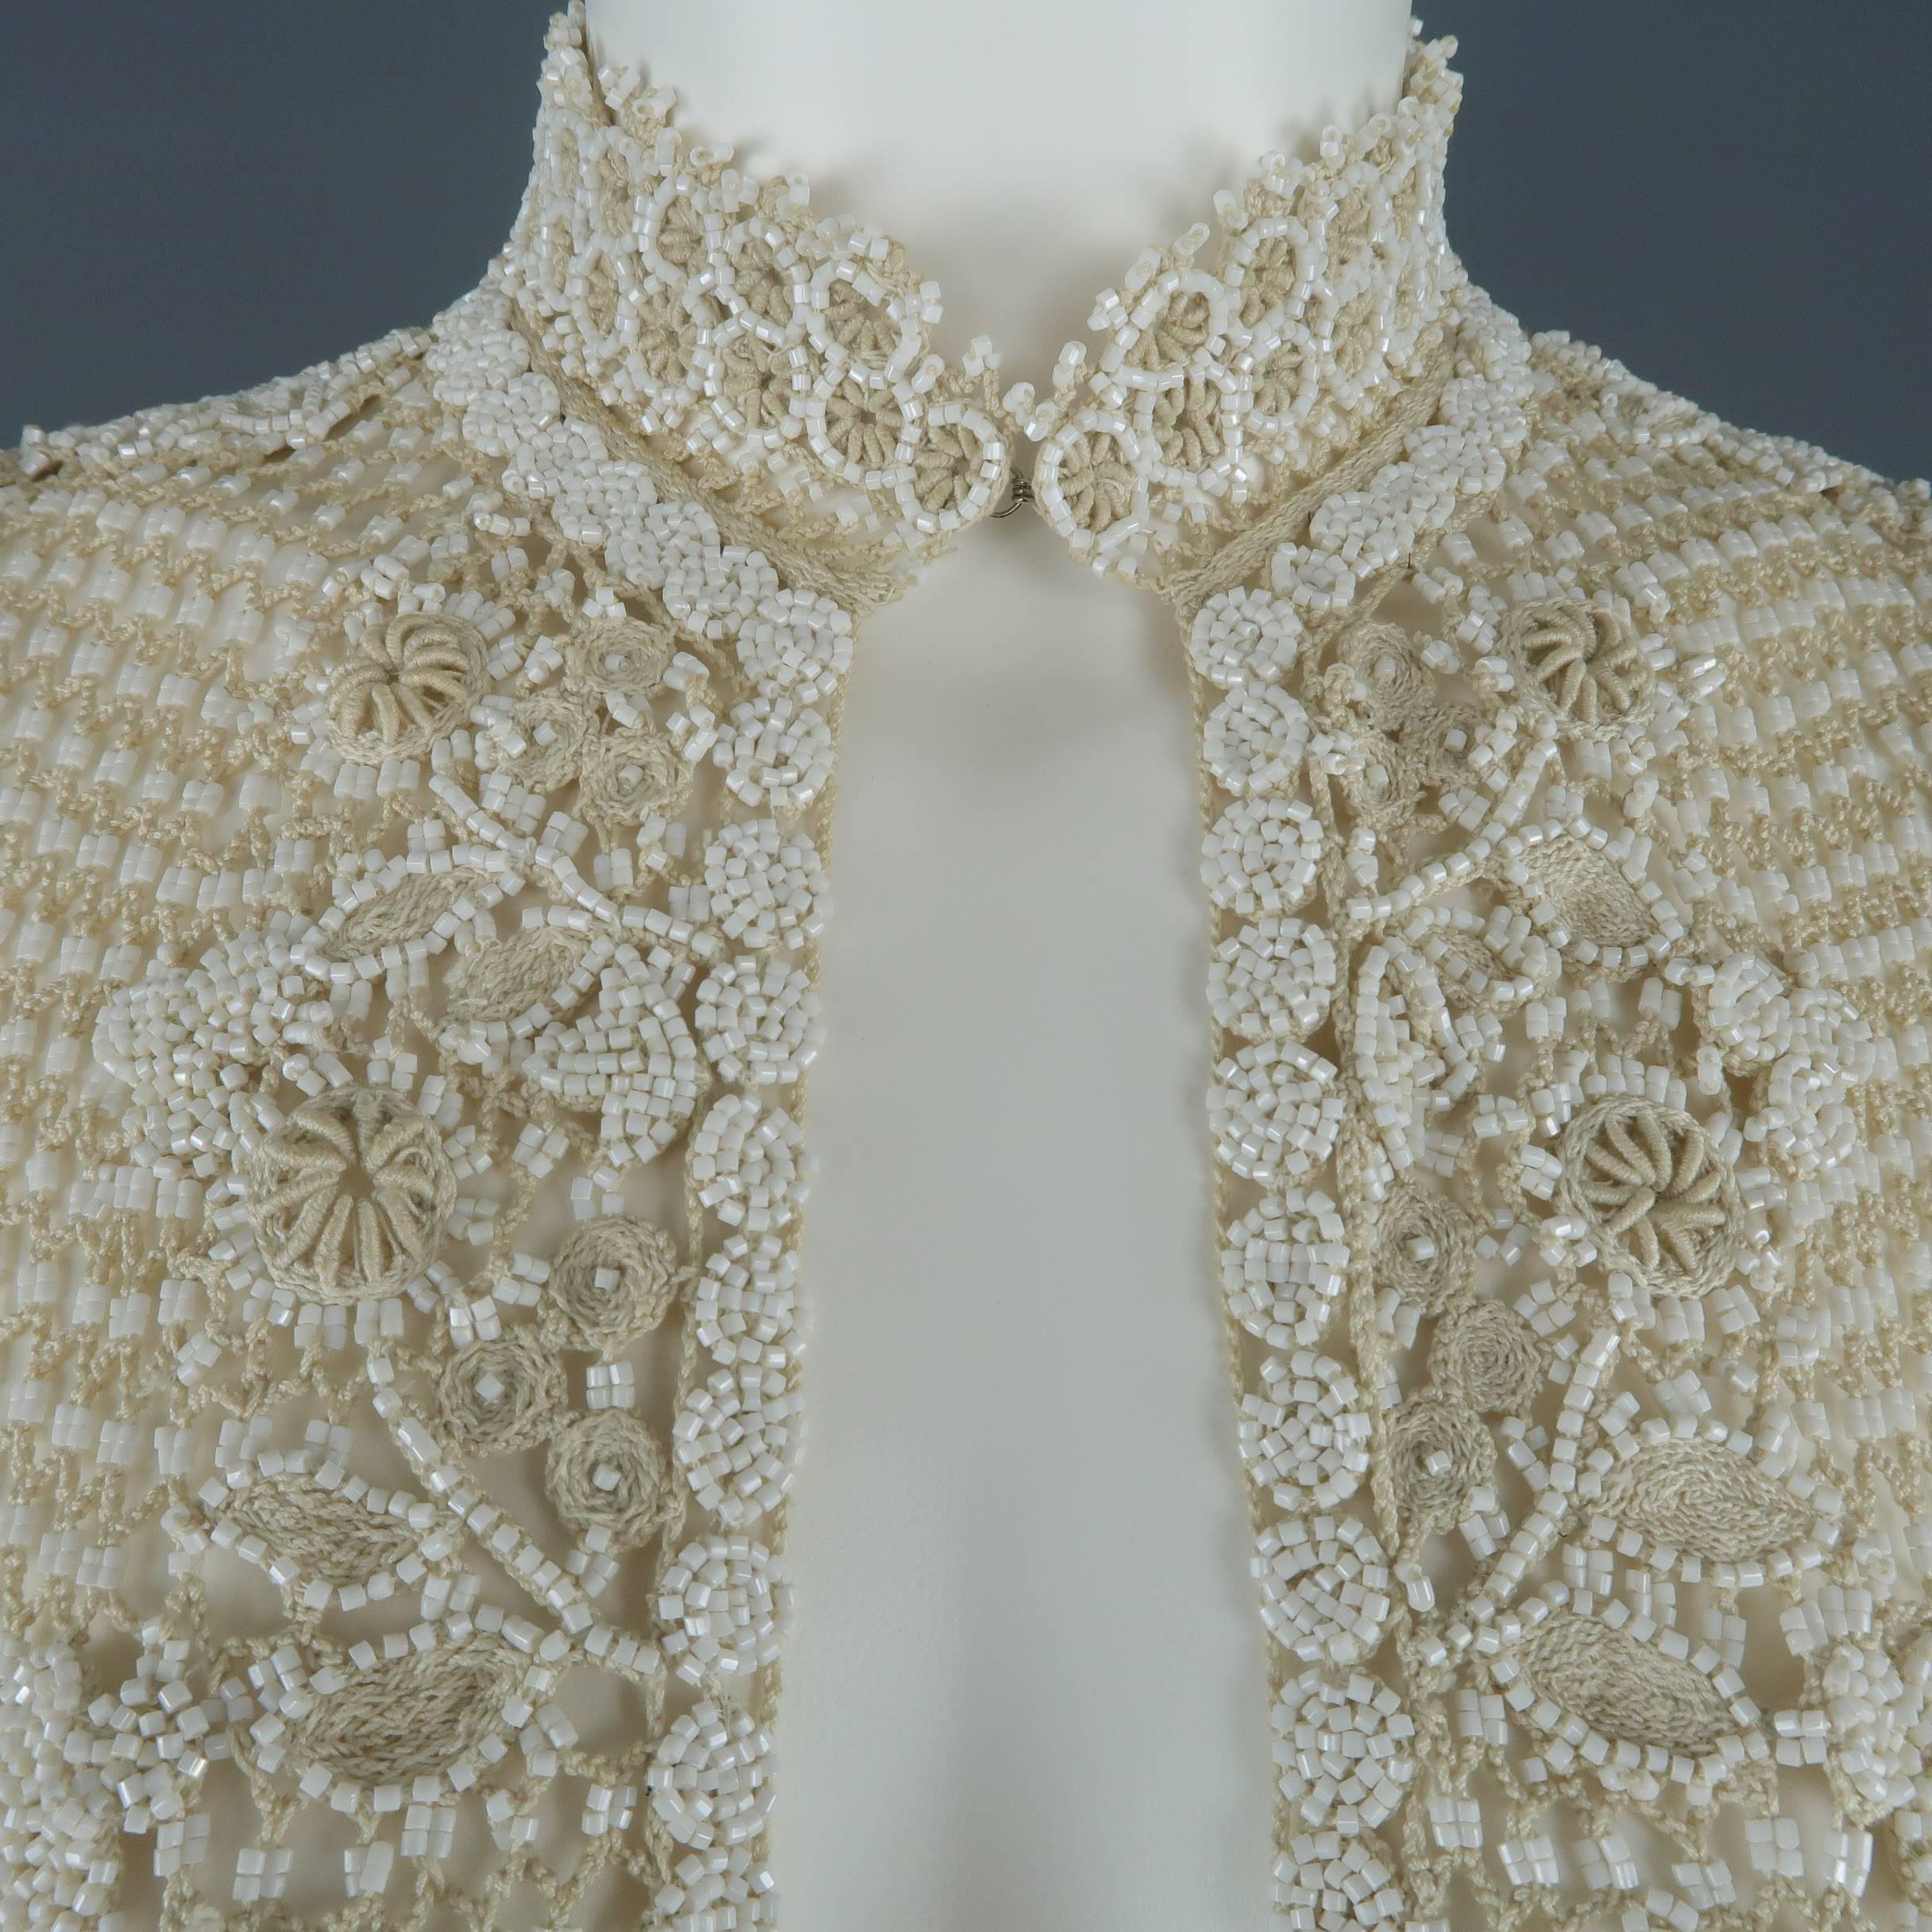 OSCAR DE A RENTA vest comes in a light beige floral patterned white beaded macrame mesh crochet knit with hook eye closures, stand up collar, and ball mesh trim. Discoloration inside collar.
 
Good Pre-Owned Condition.
Marked: (no size)
